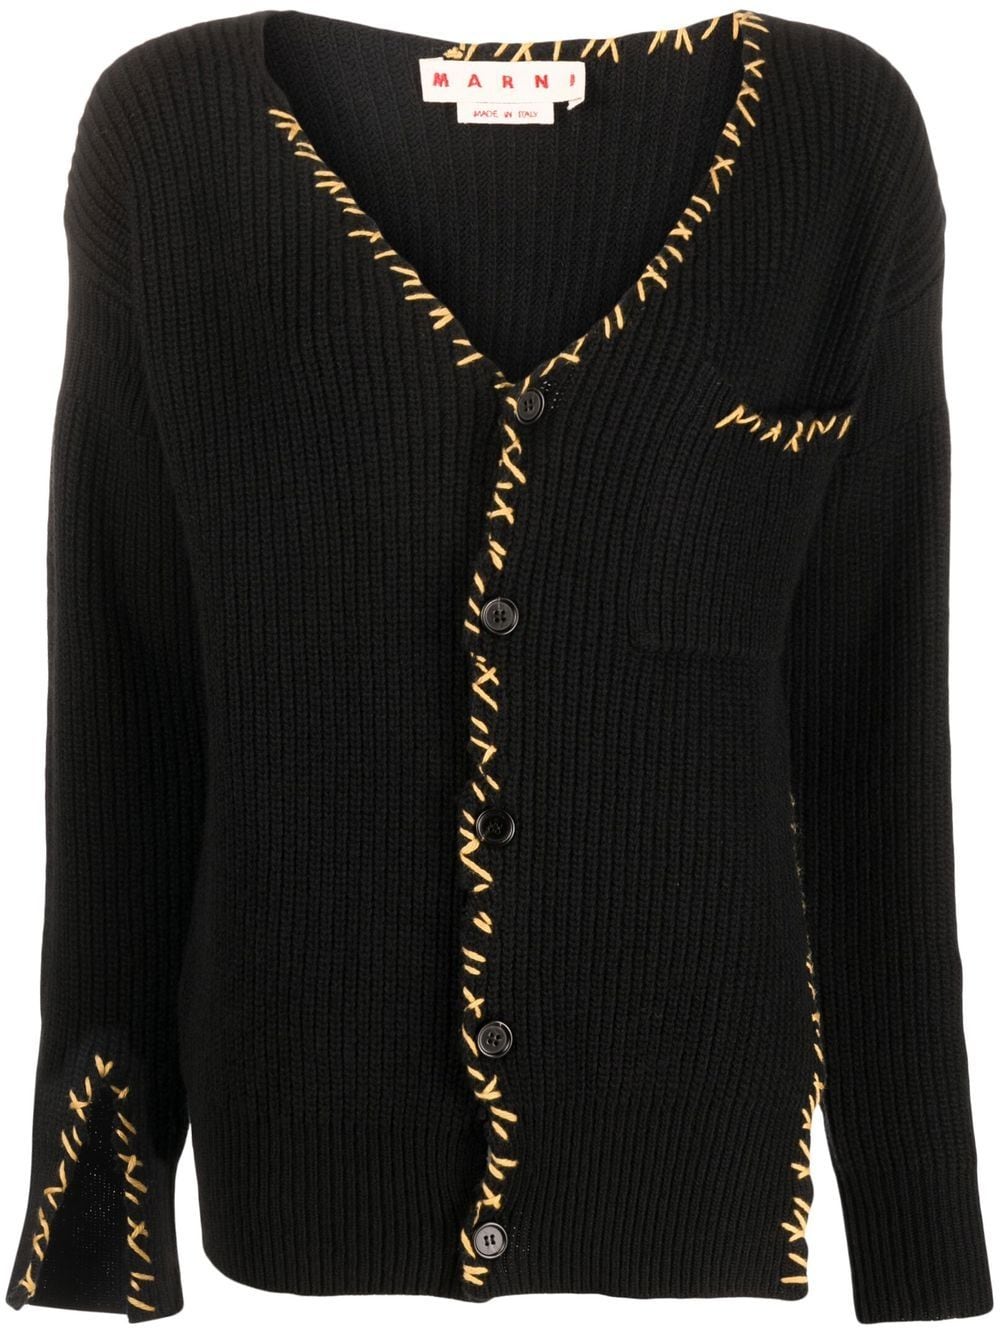 MARNI BUTTON-FRONT CARDIGAN